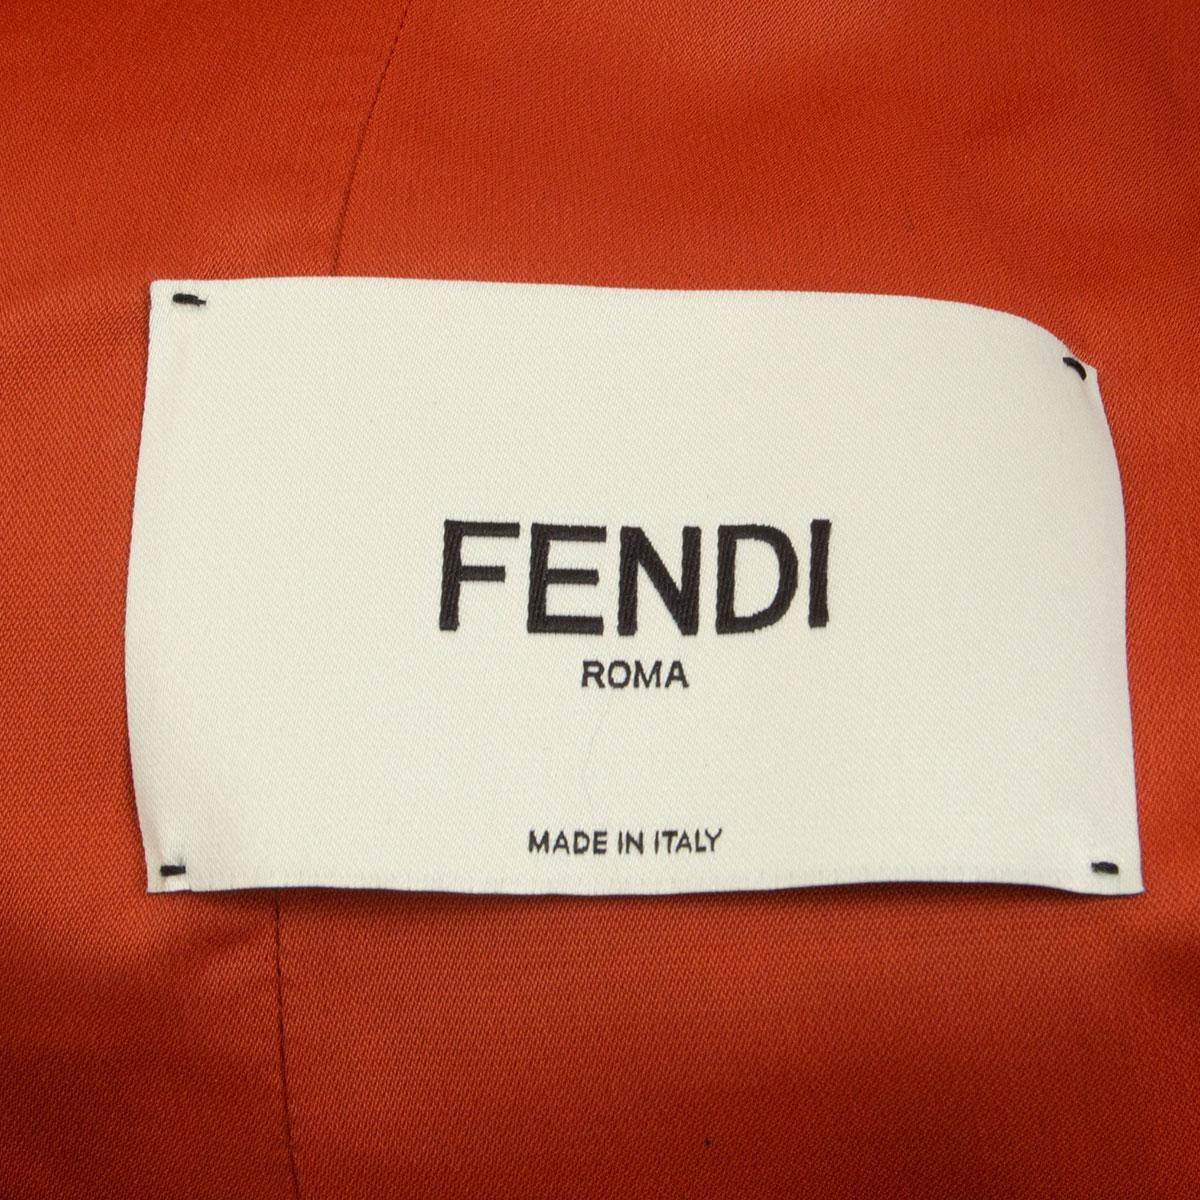 FENDI terra cotta orange leather DOUBLE BREASTED TRENCH Coat Jacket 38 XS For Sale 2